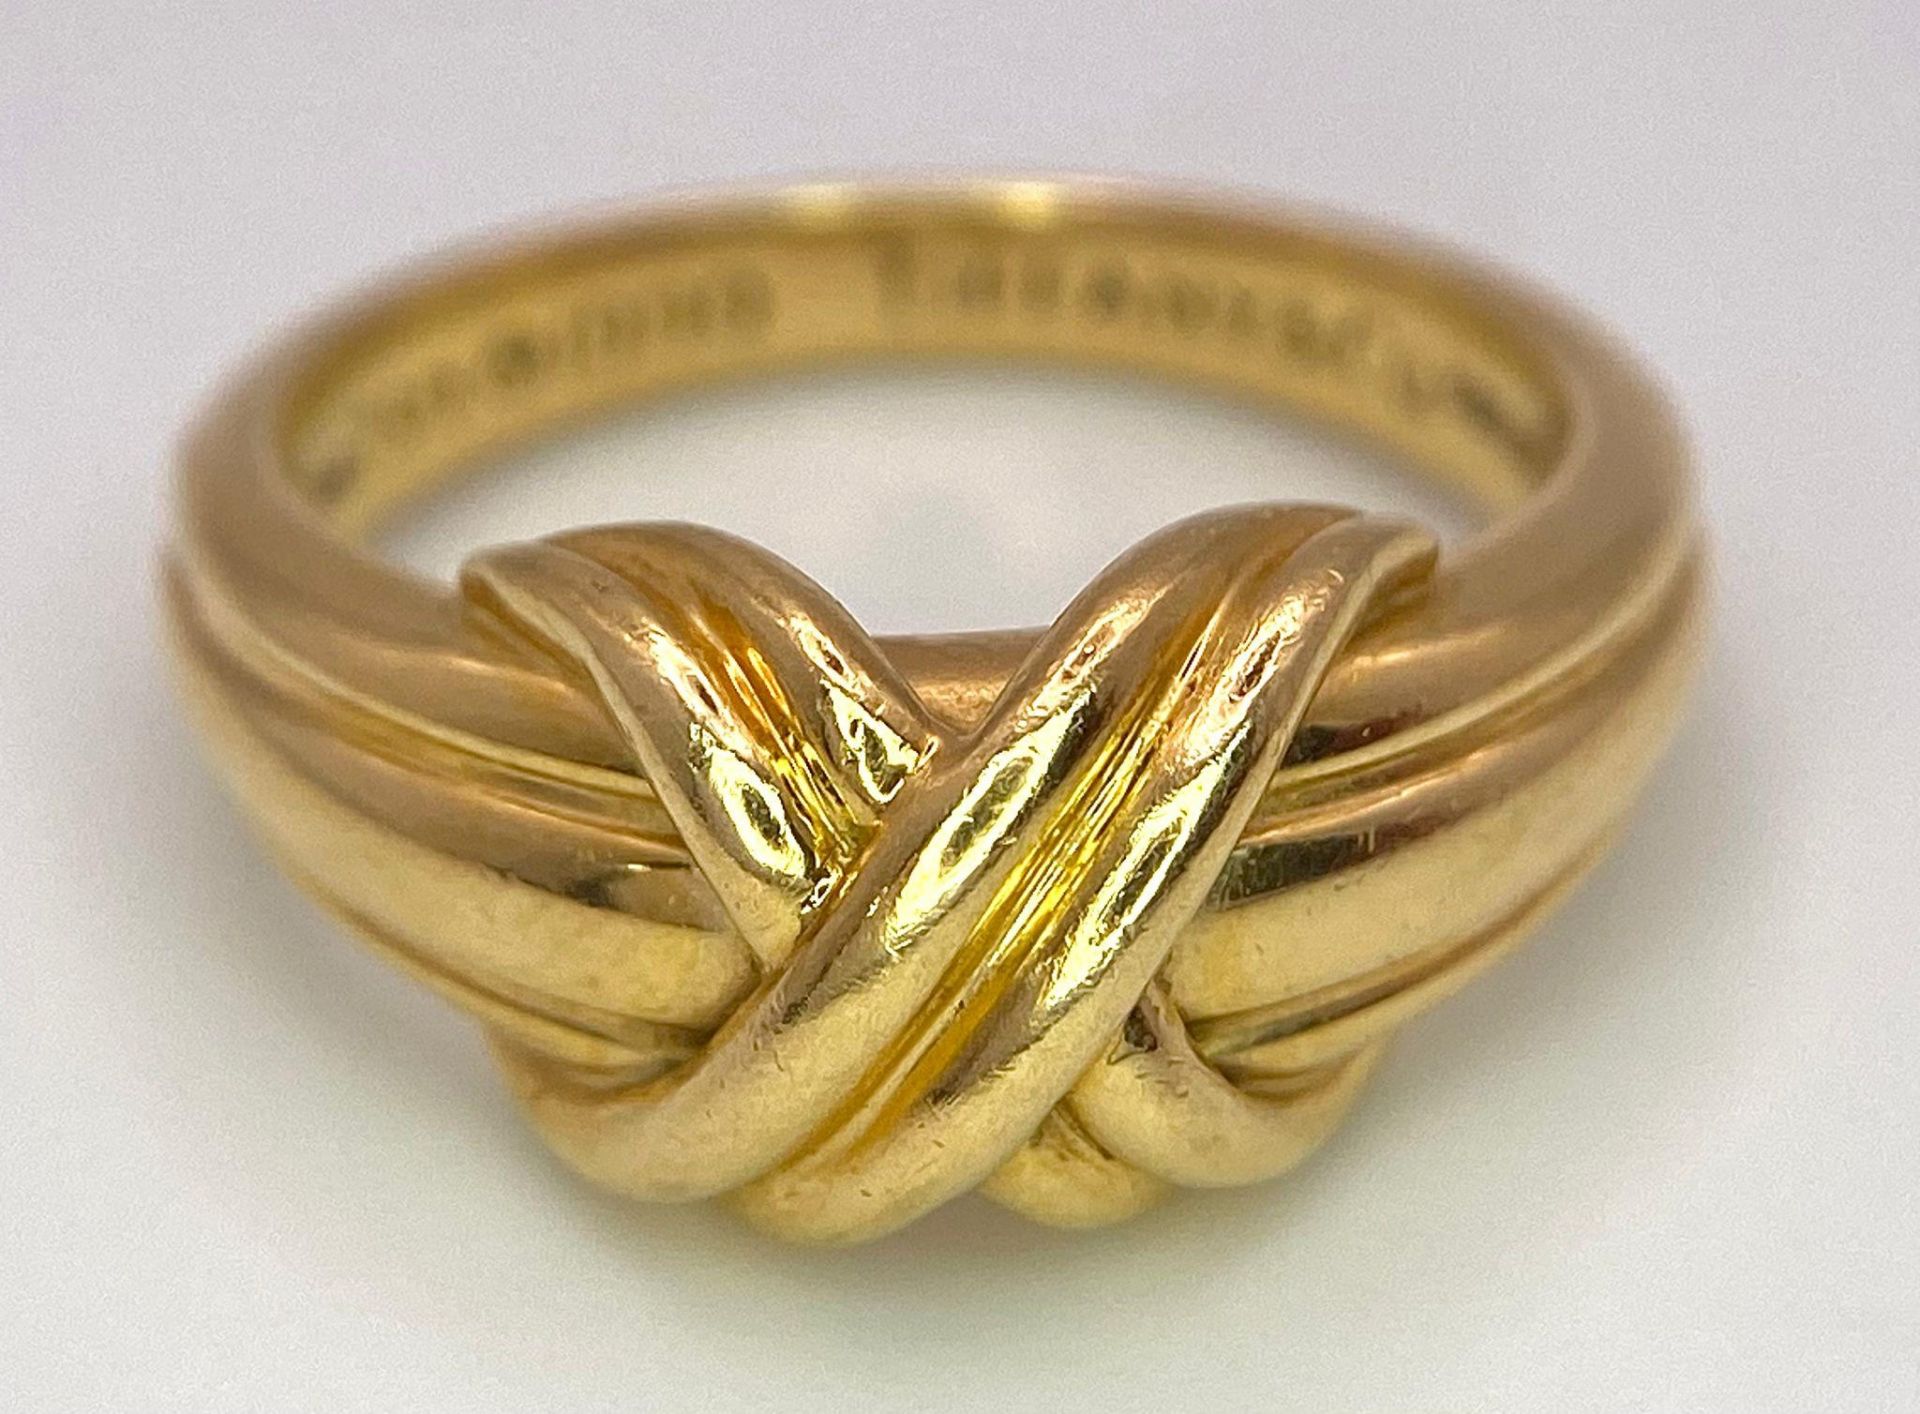 A Beautiful Tiffany and Co. 18K Gold Love Ring. Tiffany and co. markings. Size N. 7.2g weight. - Image 5 of 10